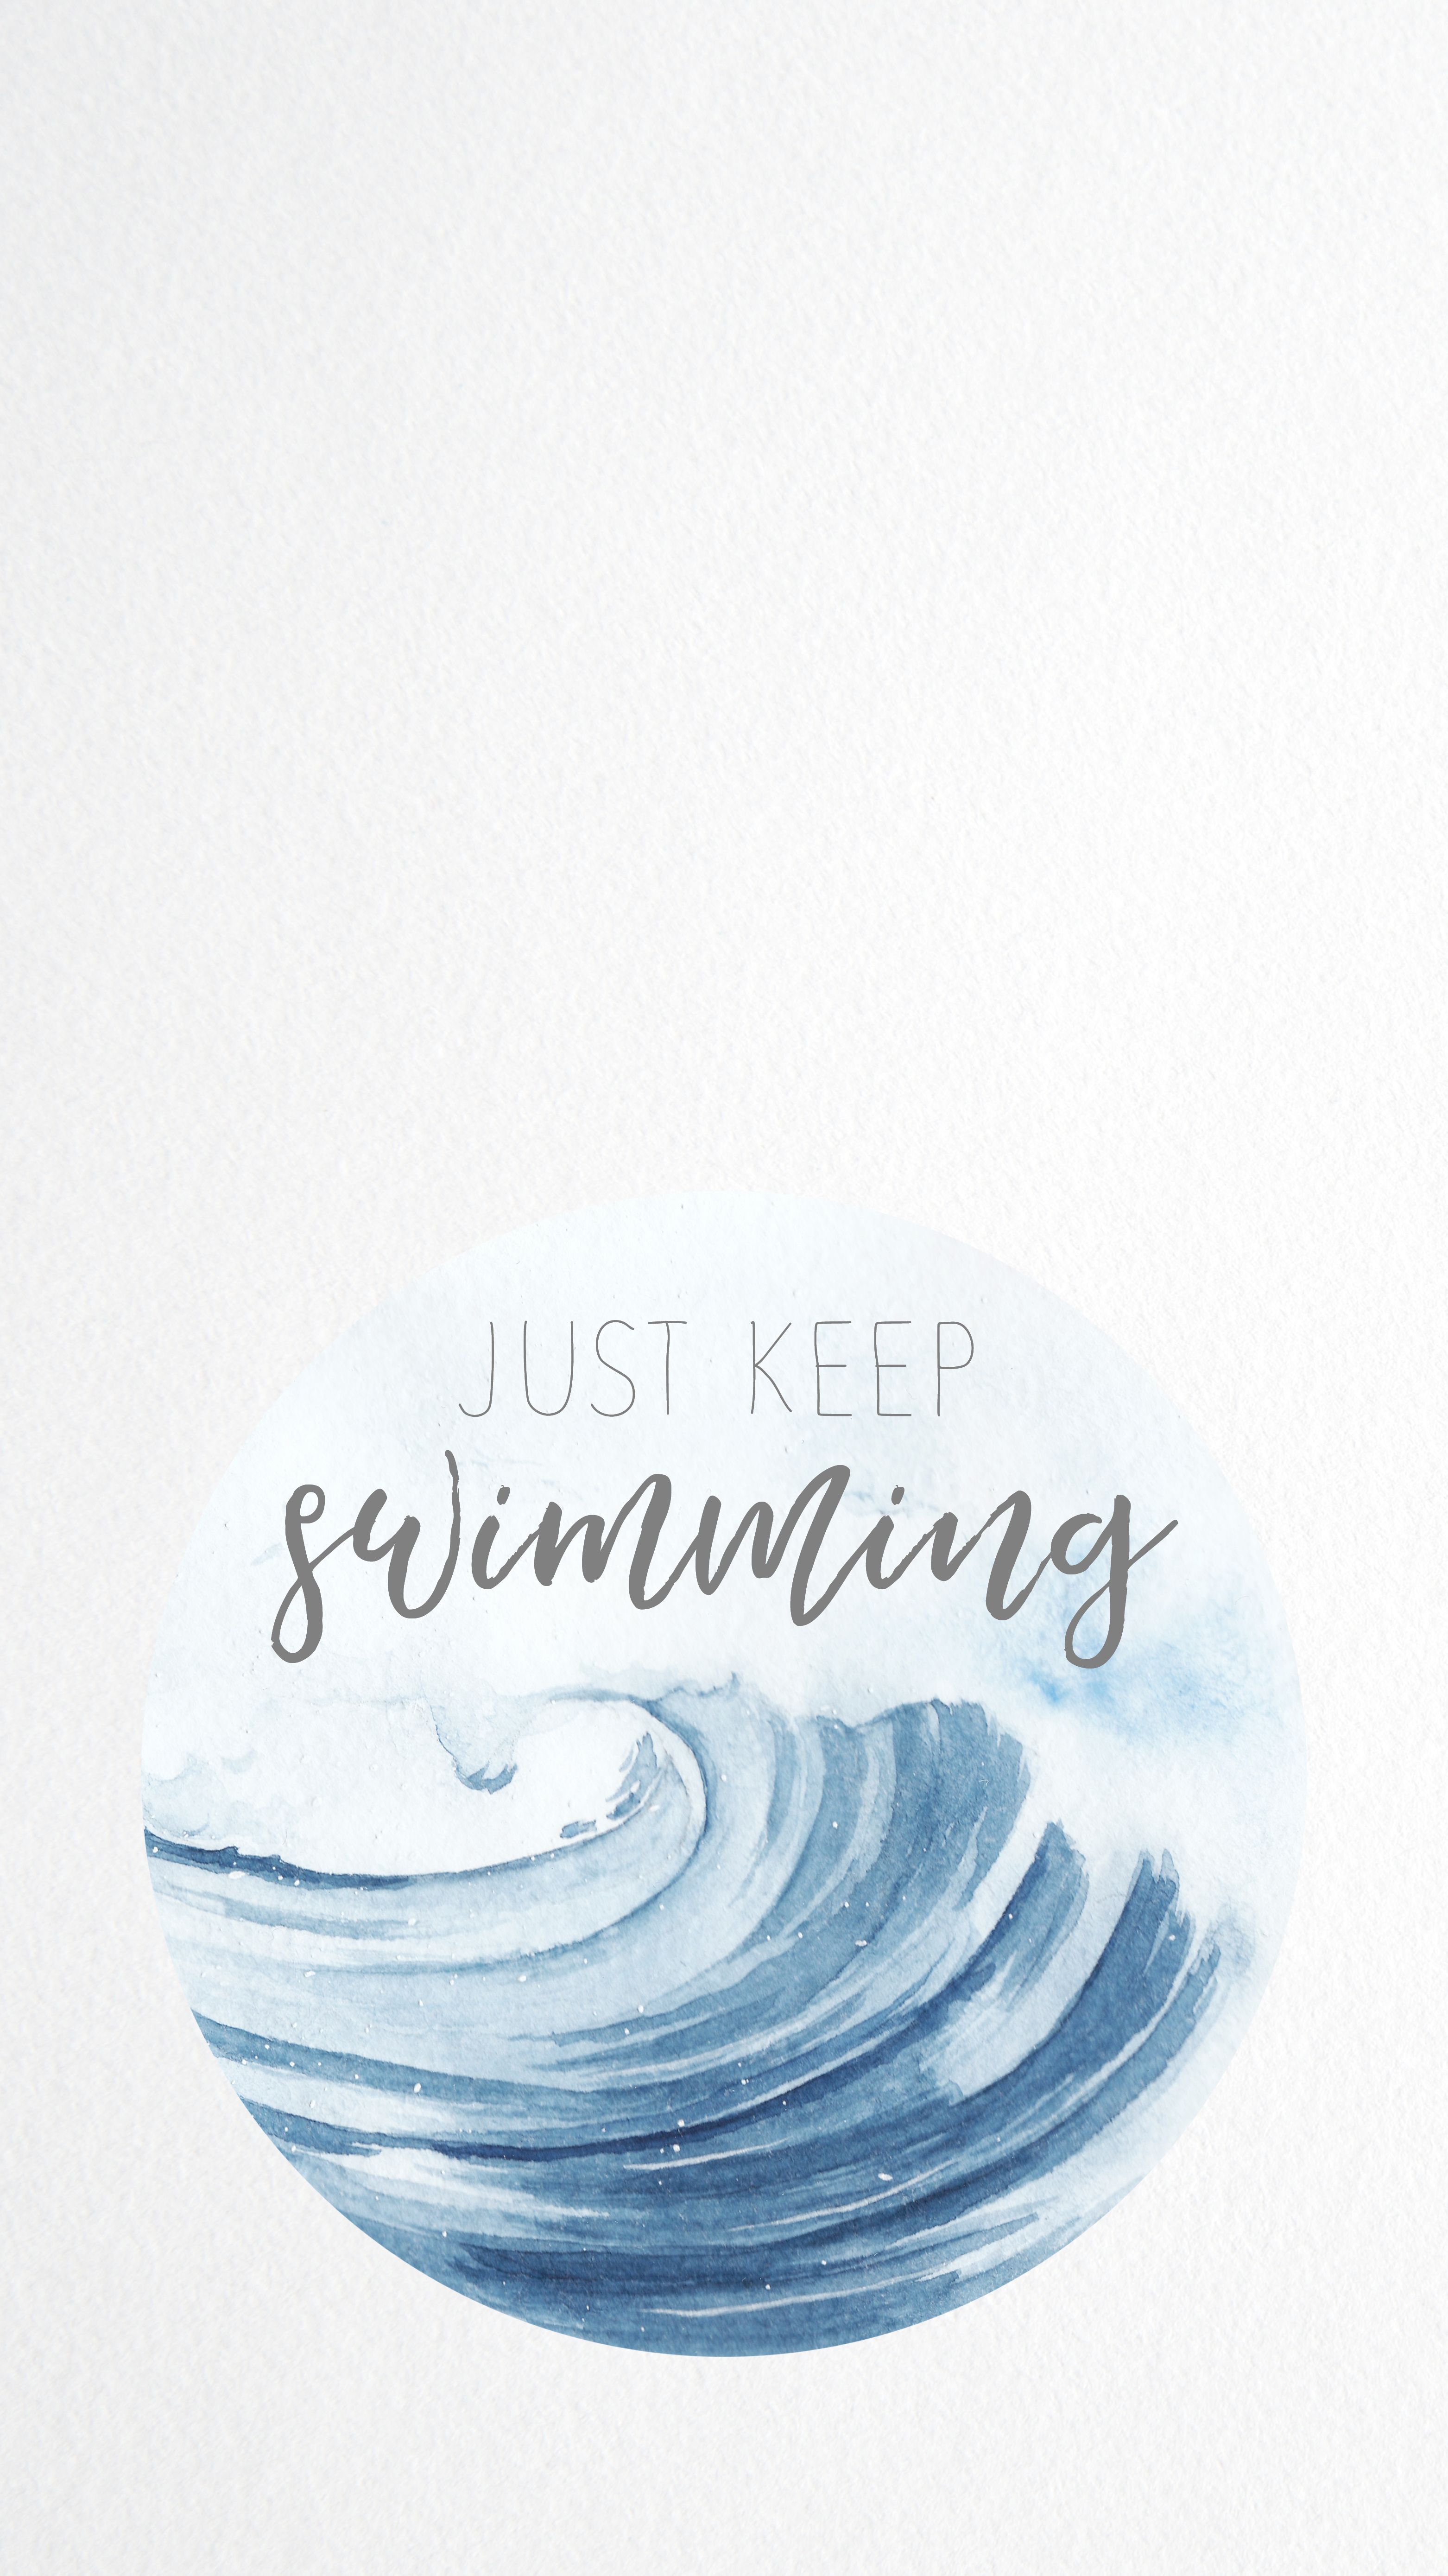 Just Keep Swimming Disney Themed Mobile Wallpaper